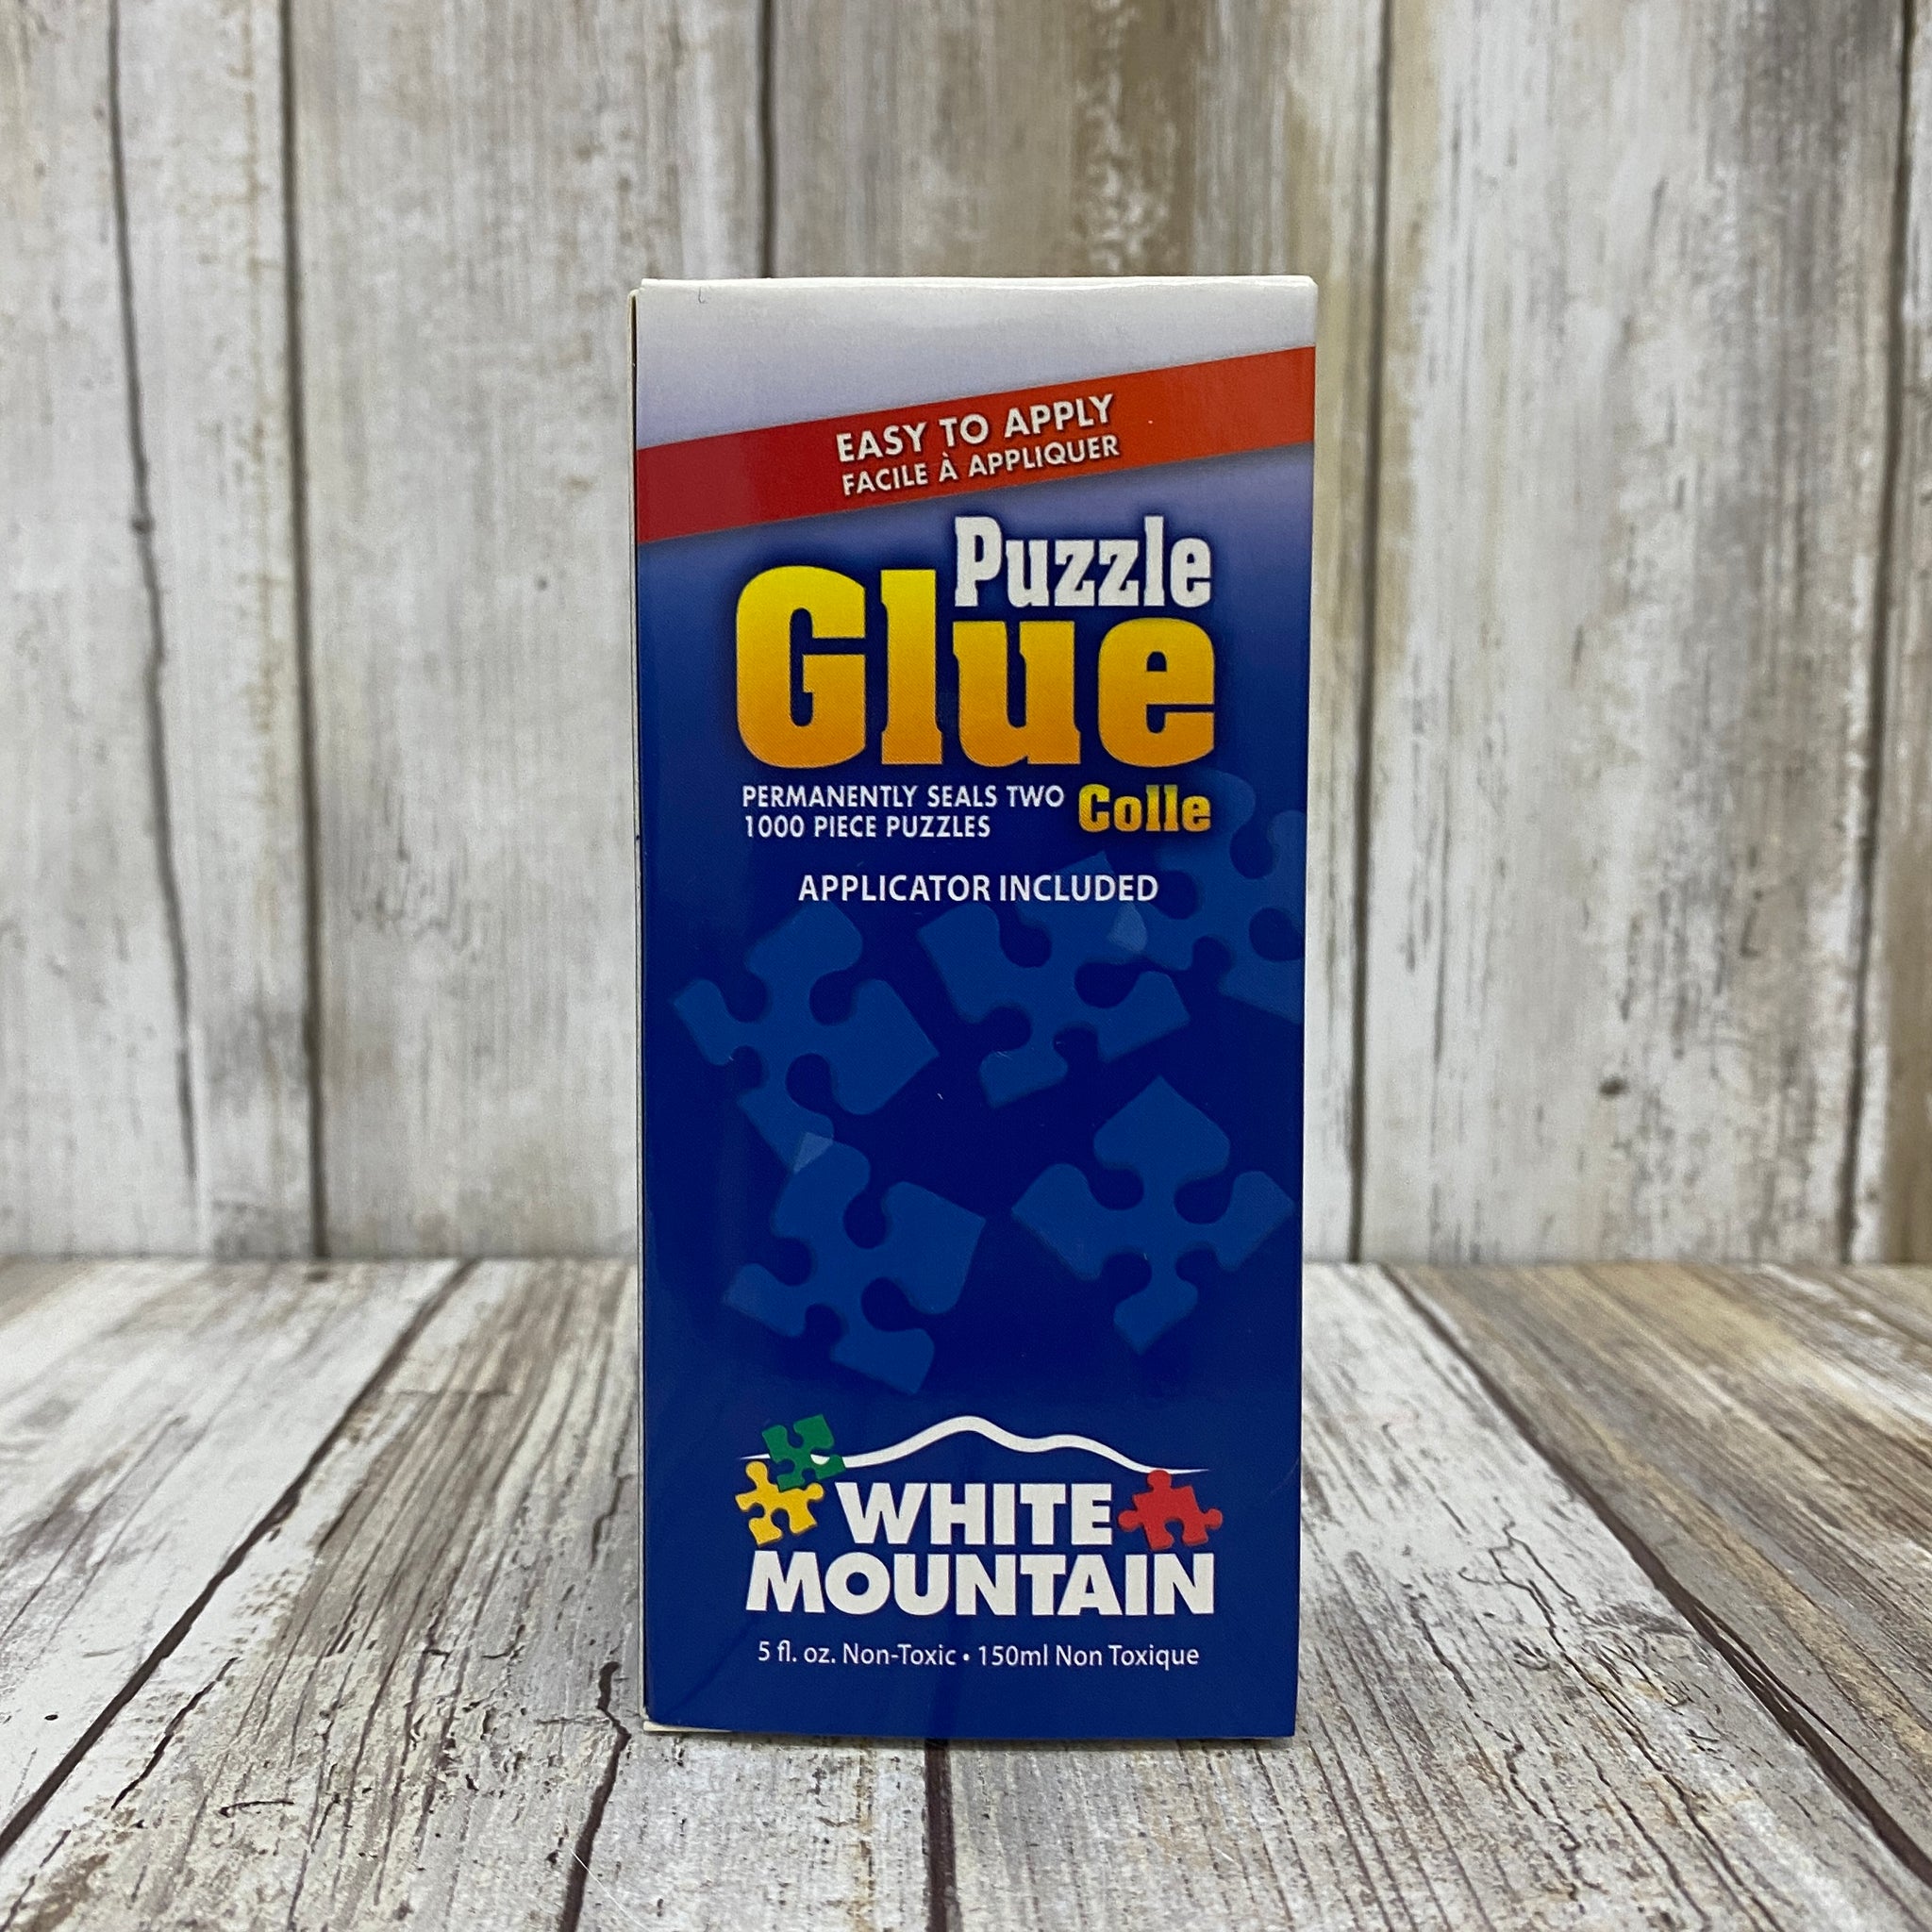 Puzzle Glue for 1000 Puzzles by White Mountain Puzzles